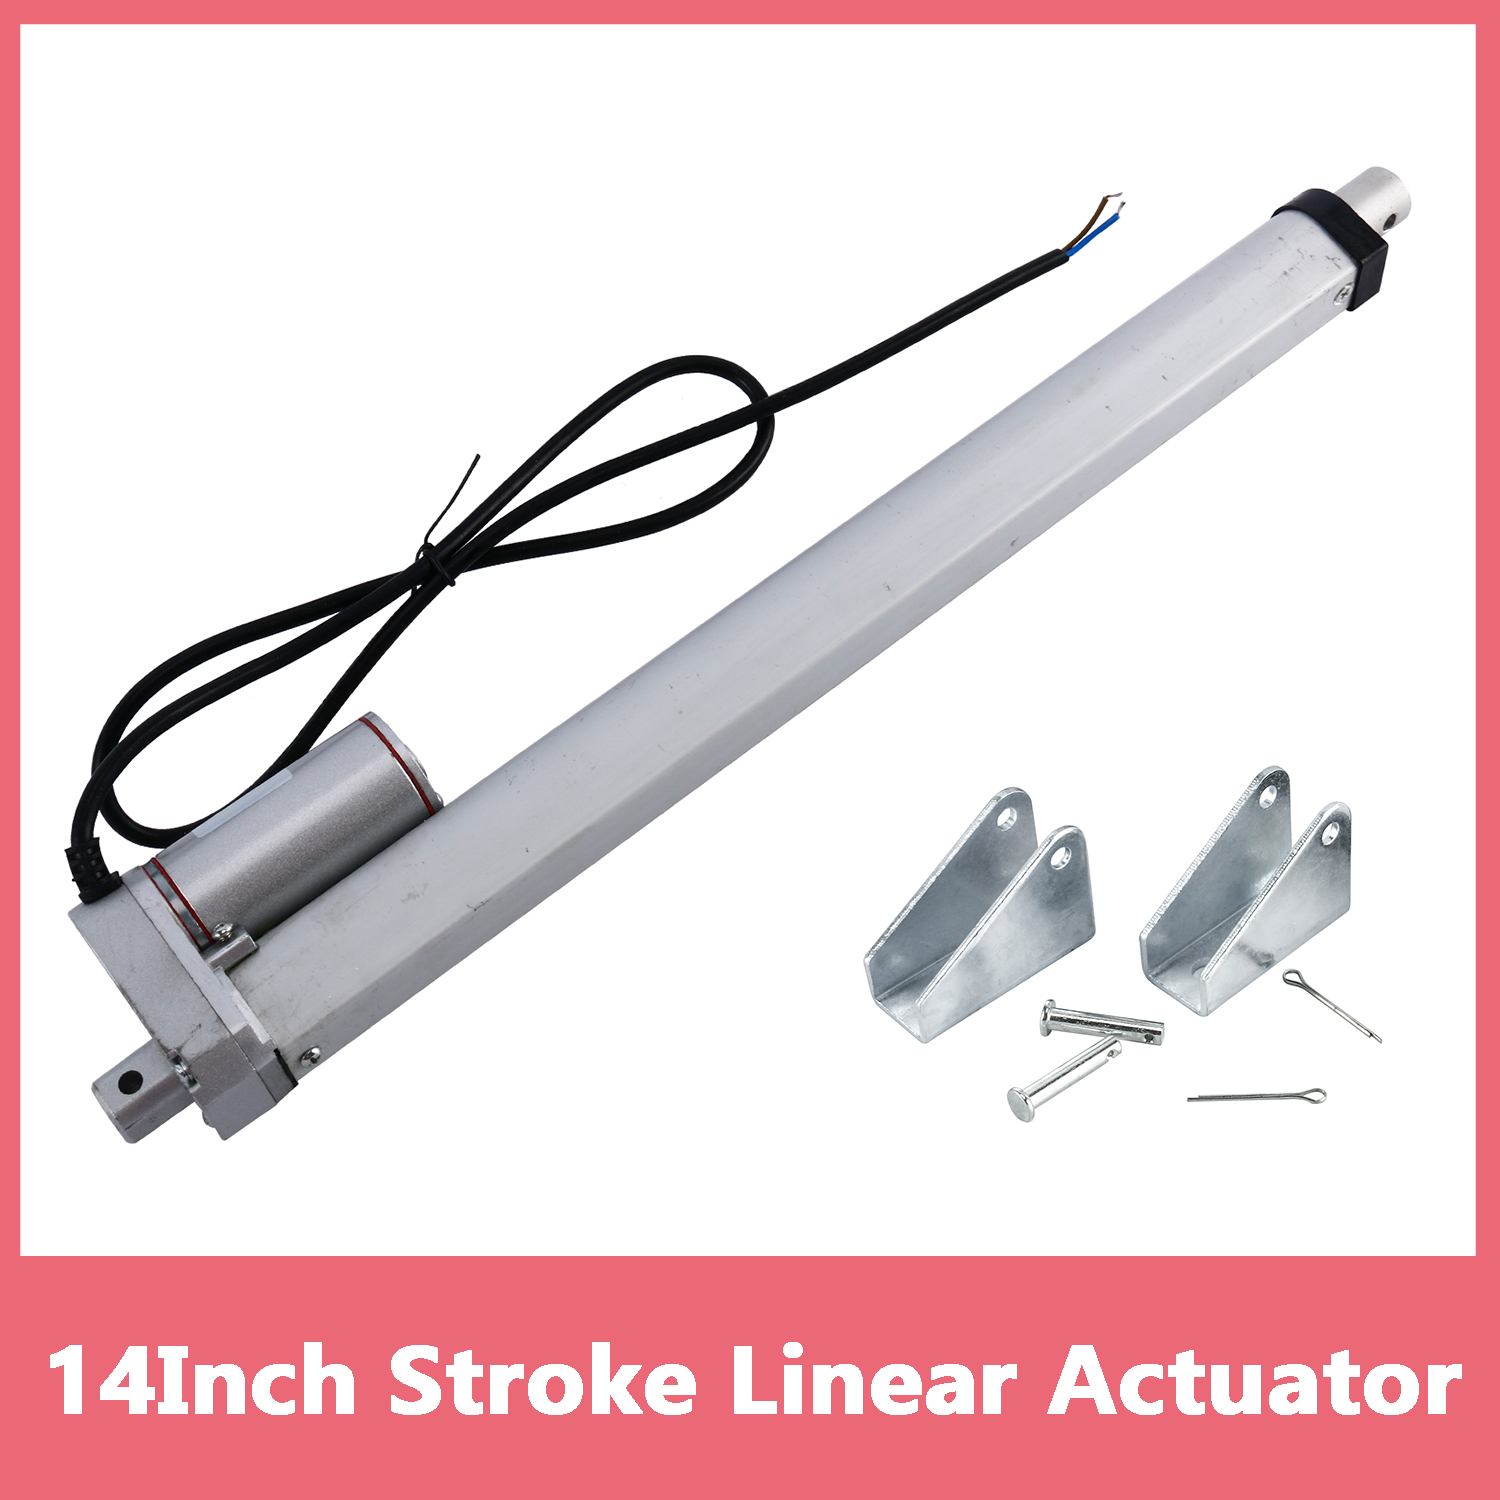 14inch Stroke Linear Actuator For Table Lift Standing Desk